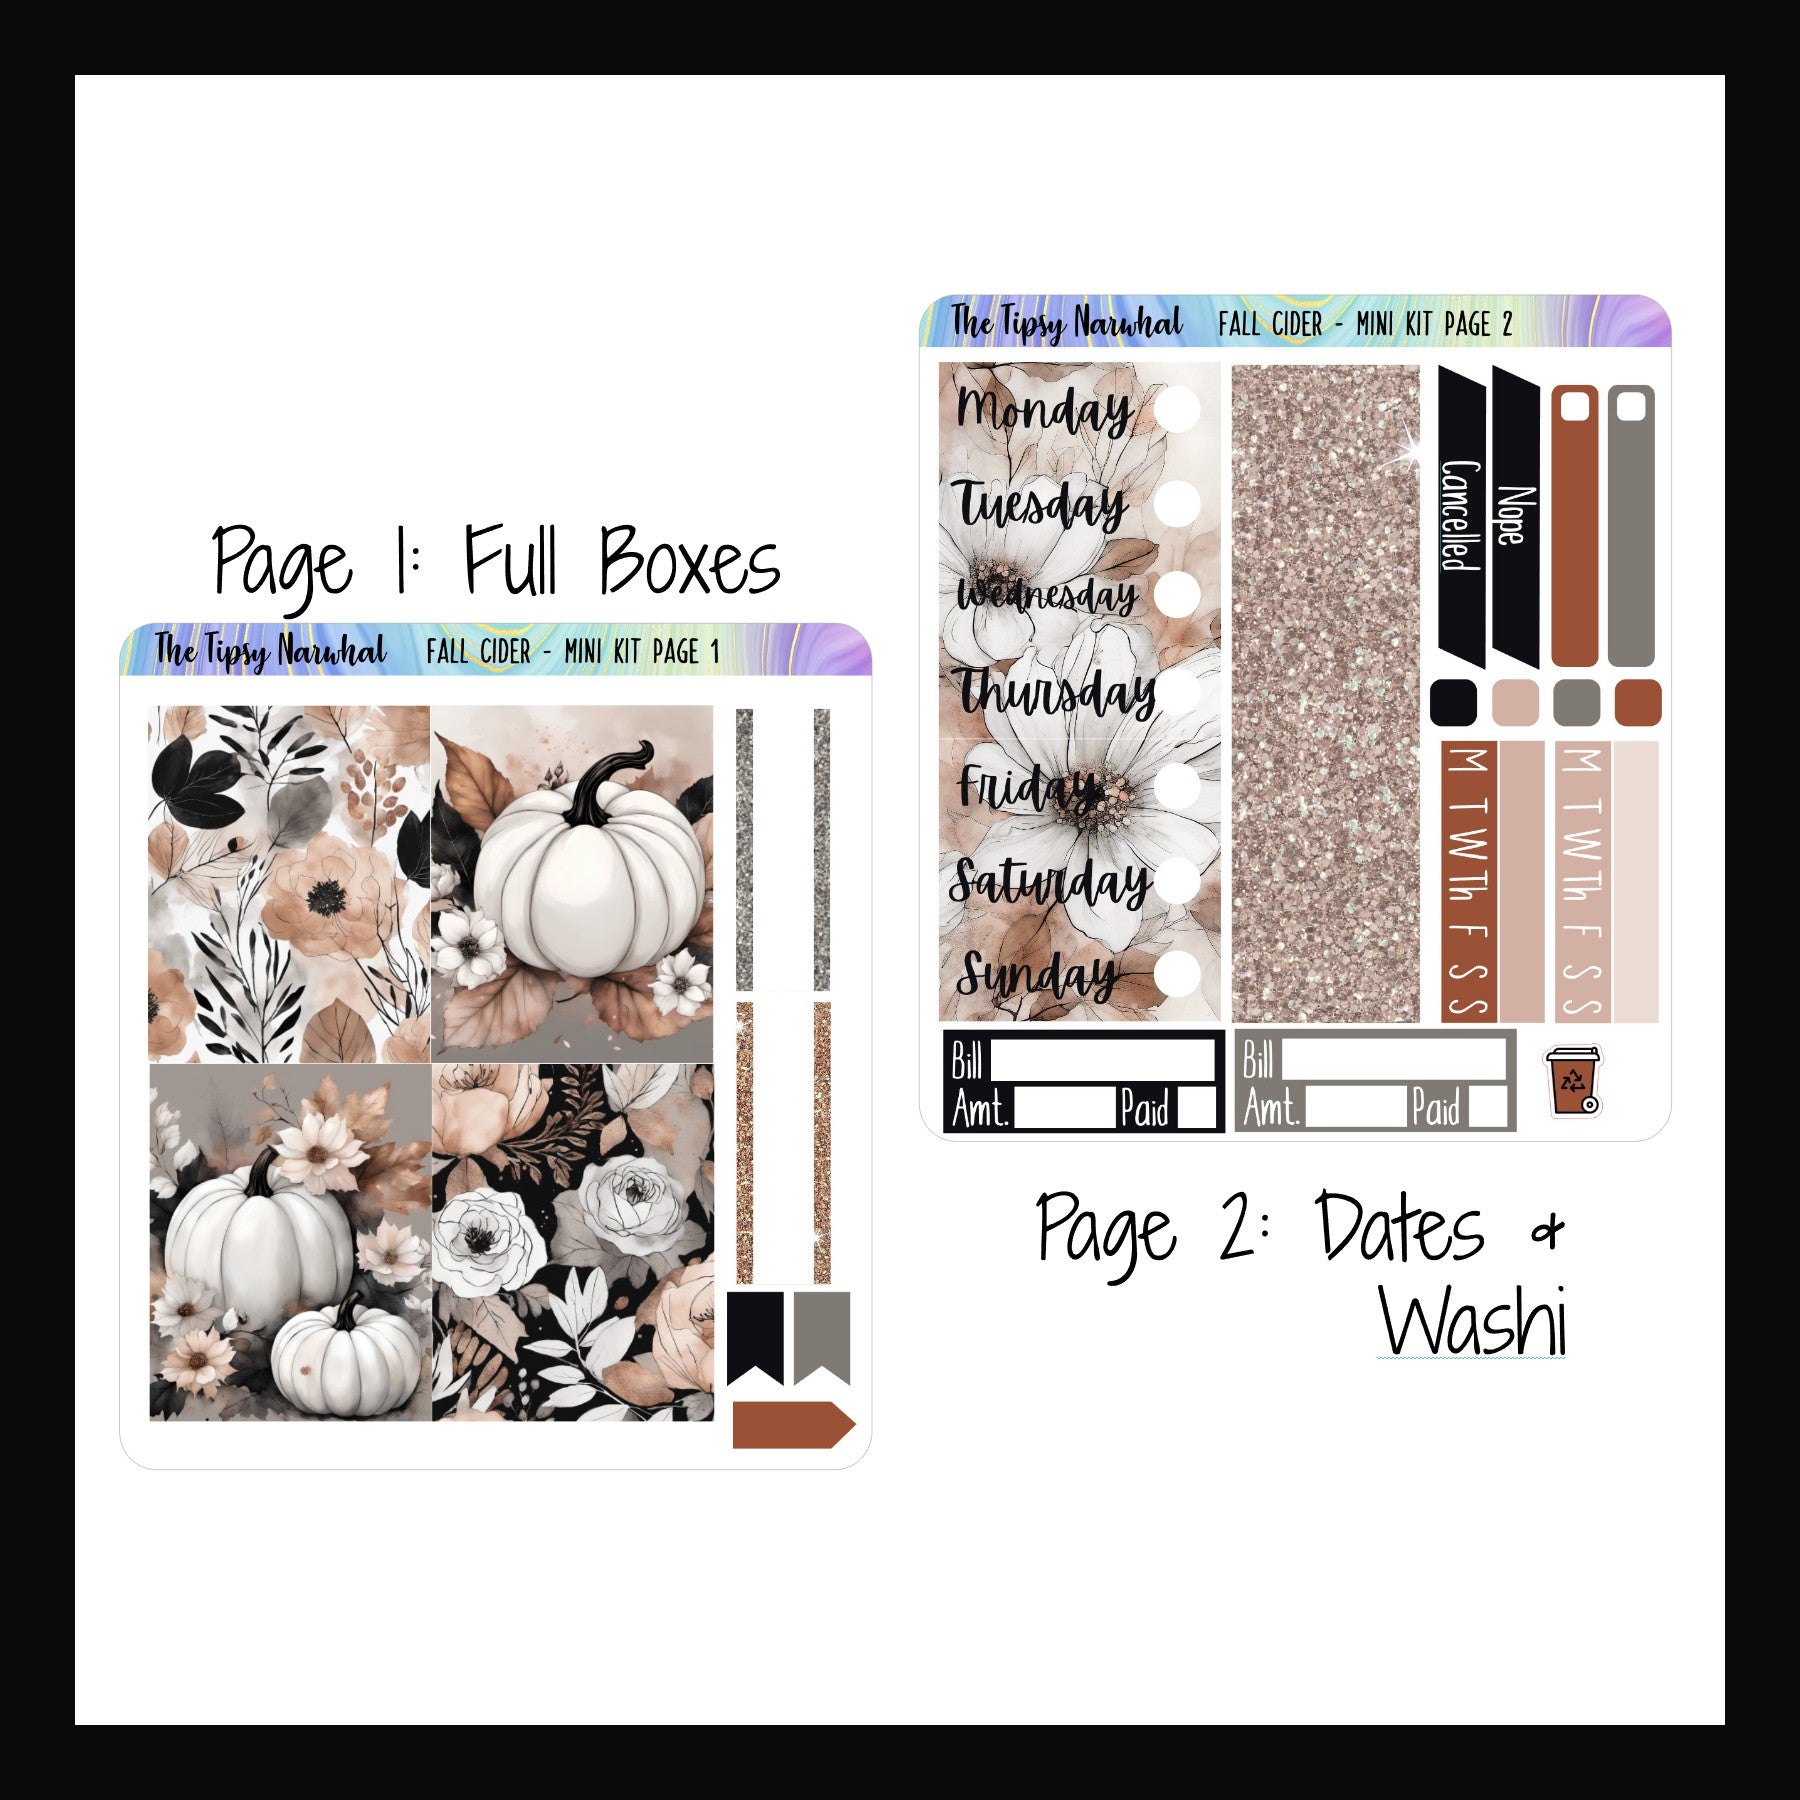 Fall Cider mini vertical kit pages 1 and 2, full box decor, date covers, washi strips, habit trackers, bill trackers, cancel stickers, orange, pink, black and greige, fall flowers, fall leaves, autumn, pumpkins